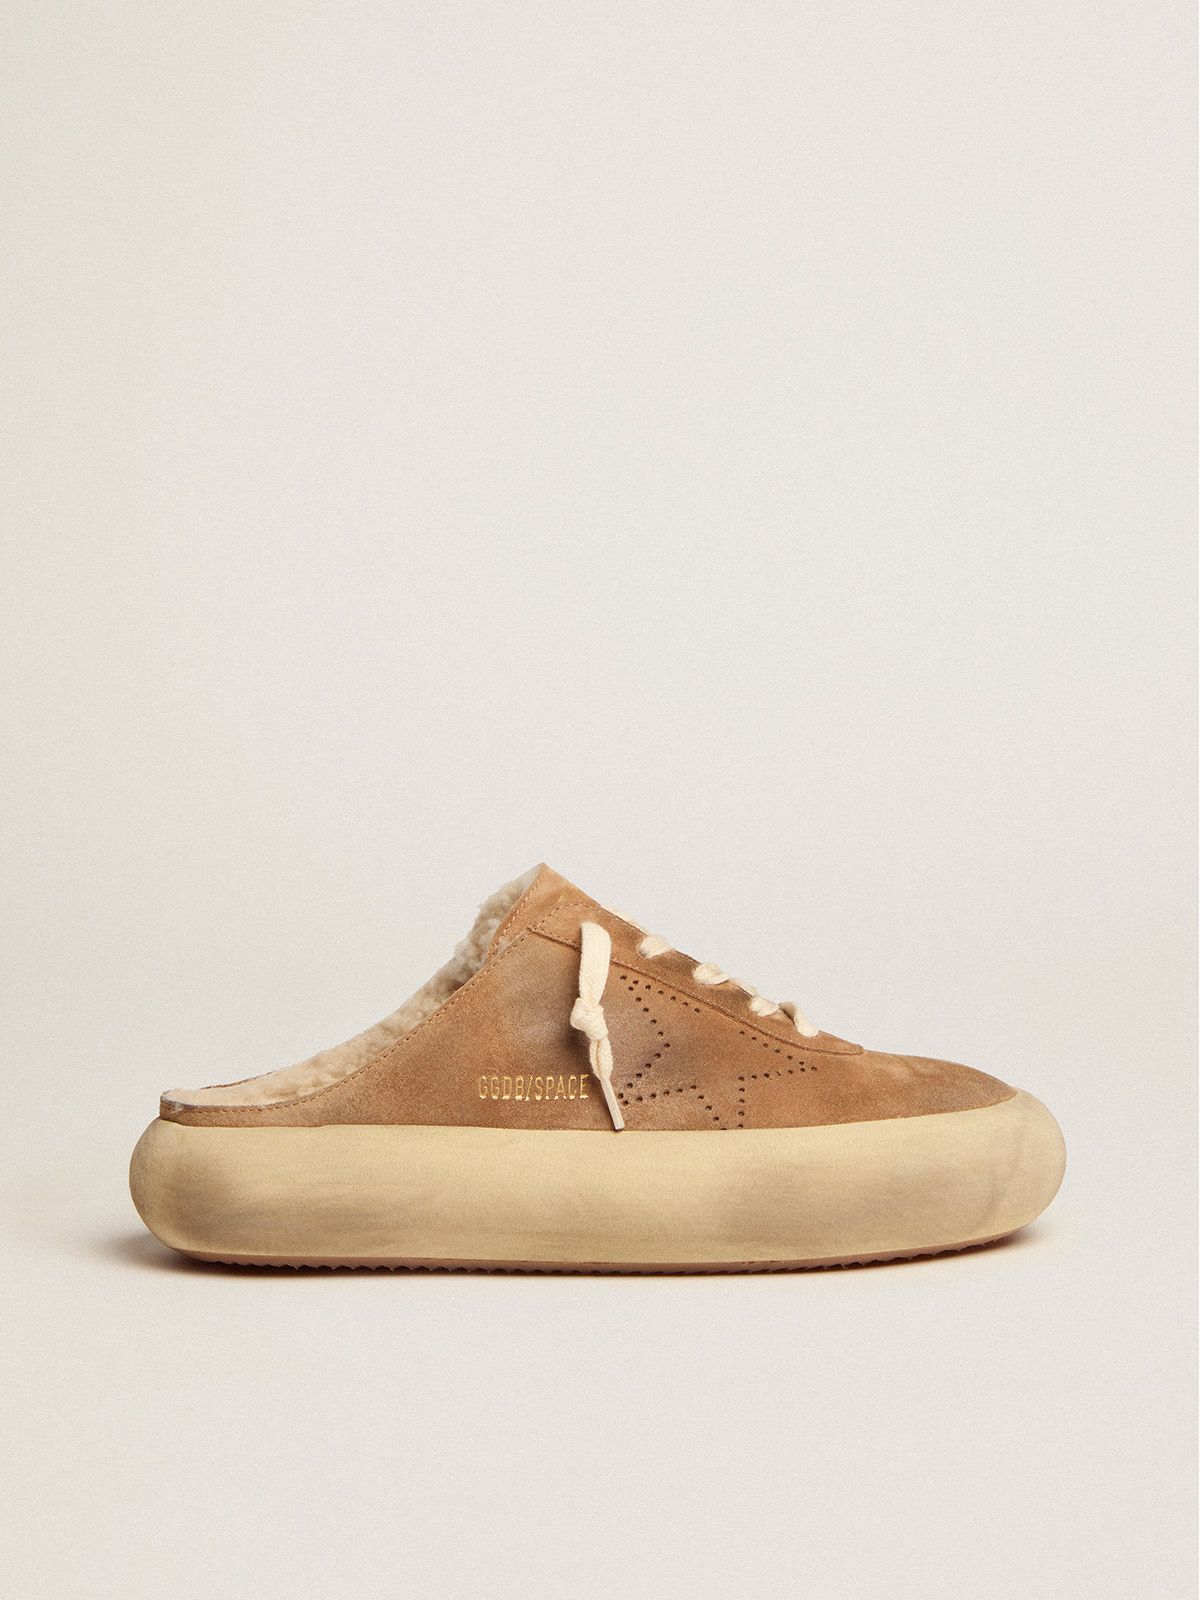 golden goose Sabot shearling Space-Star shoes tobacco-colored in lining with suede